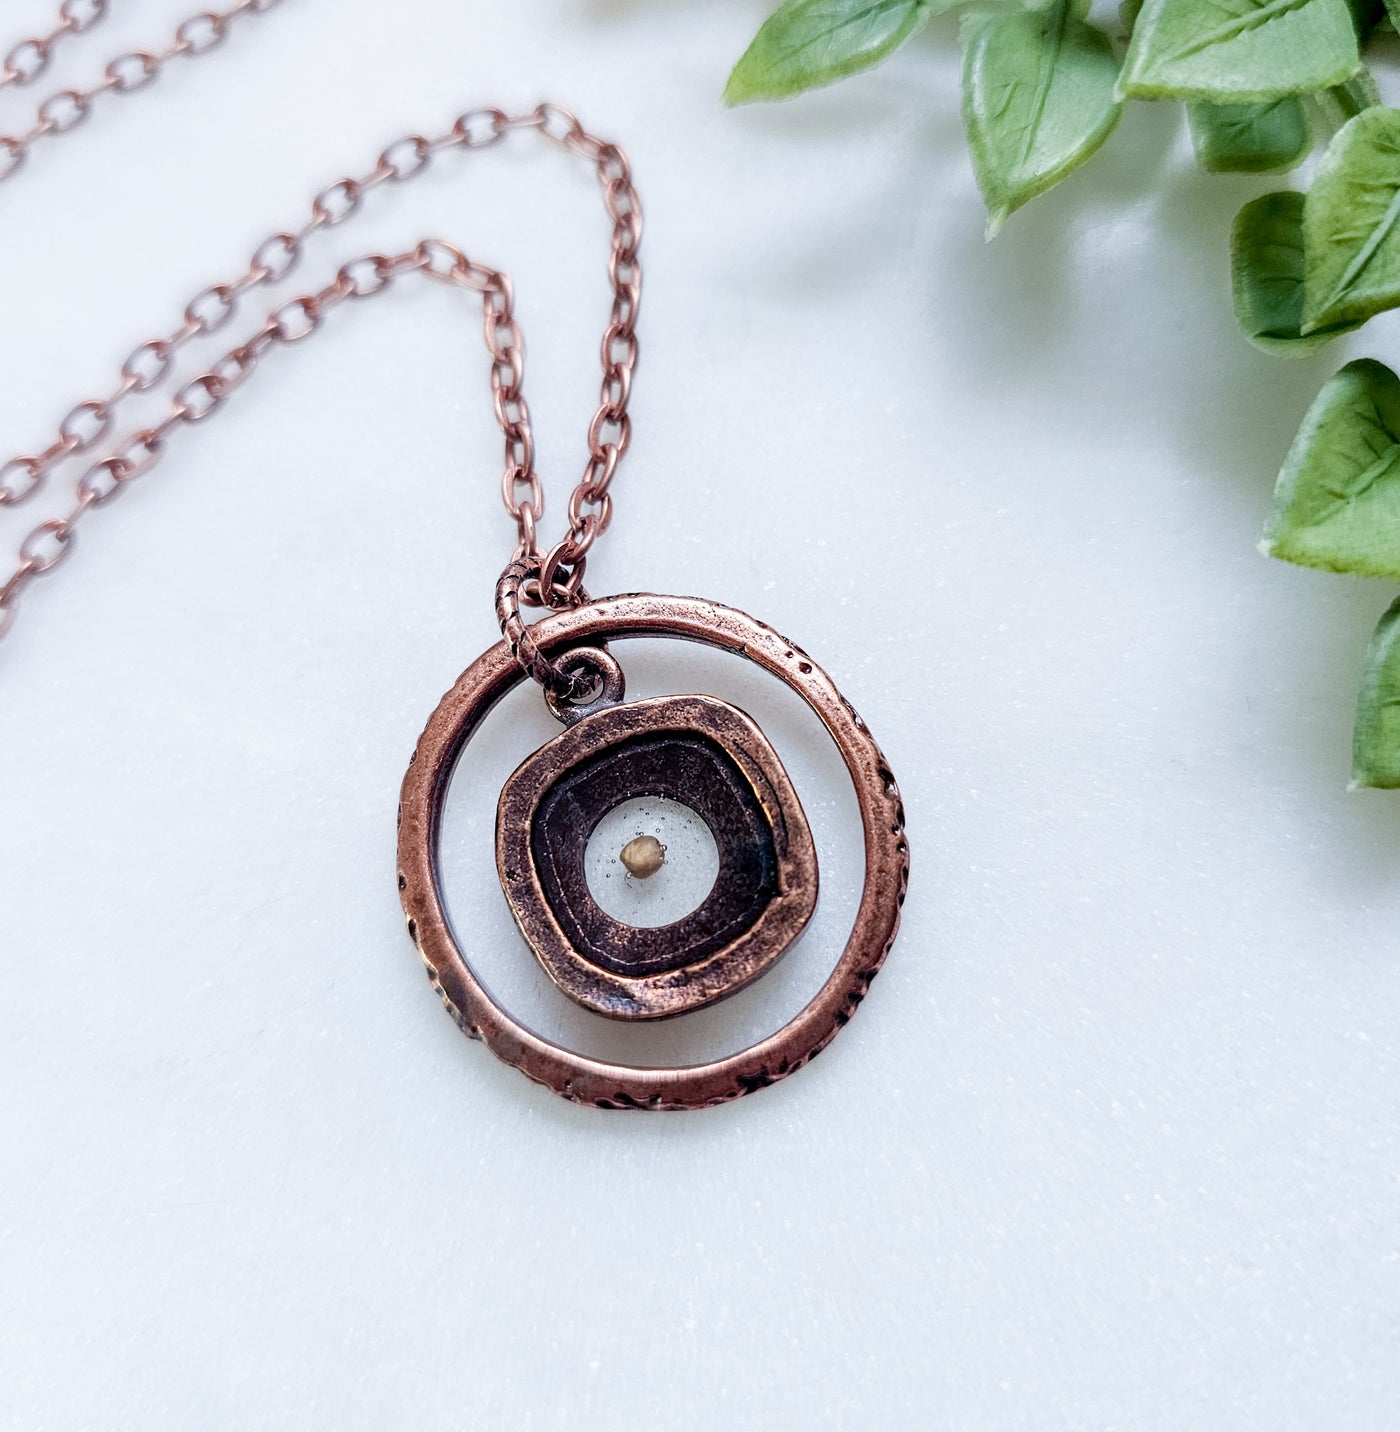 Mustard Seed  Layered Copper Necklaces